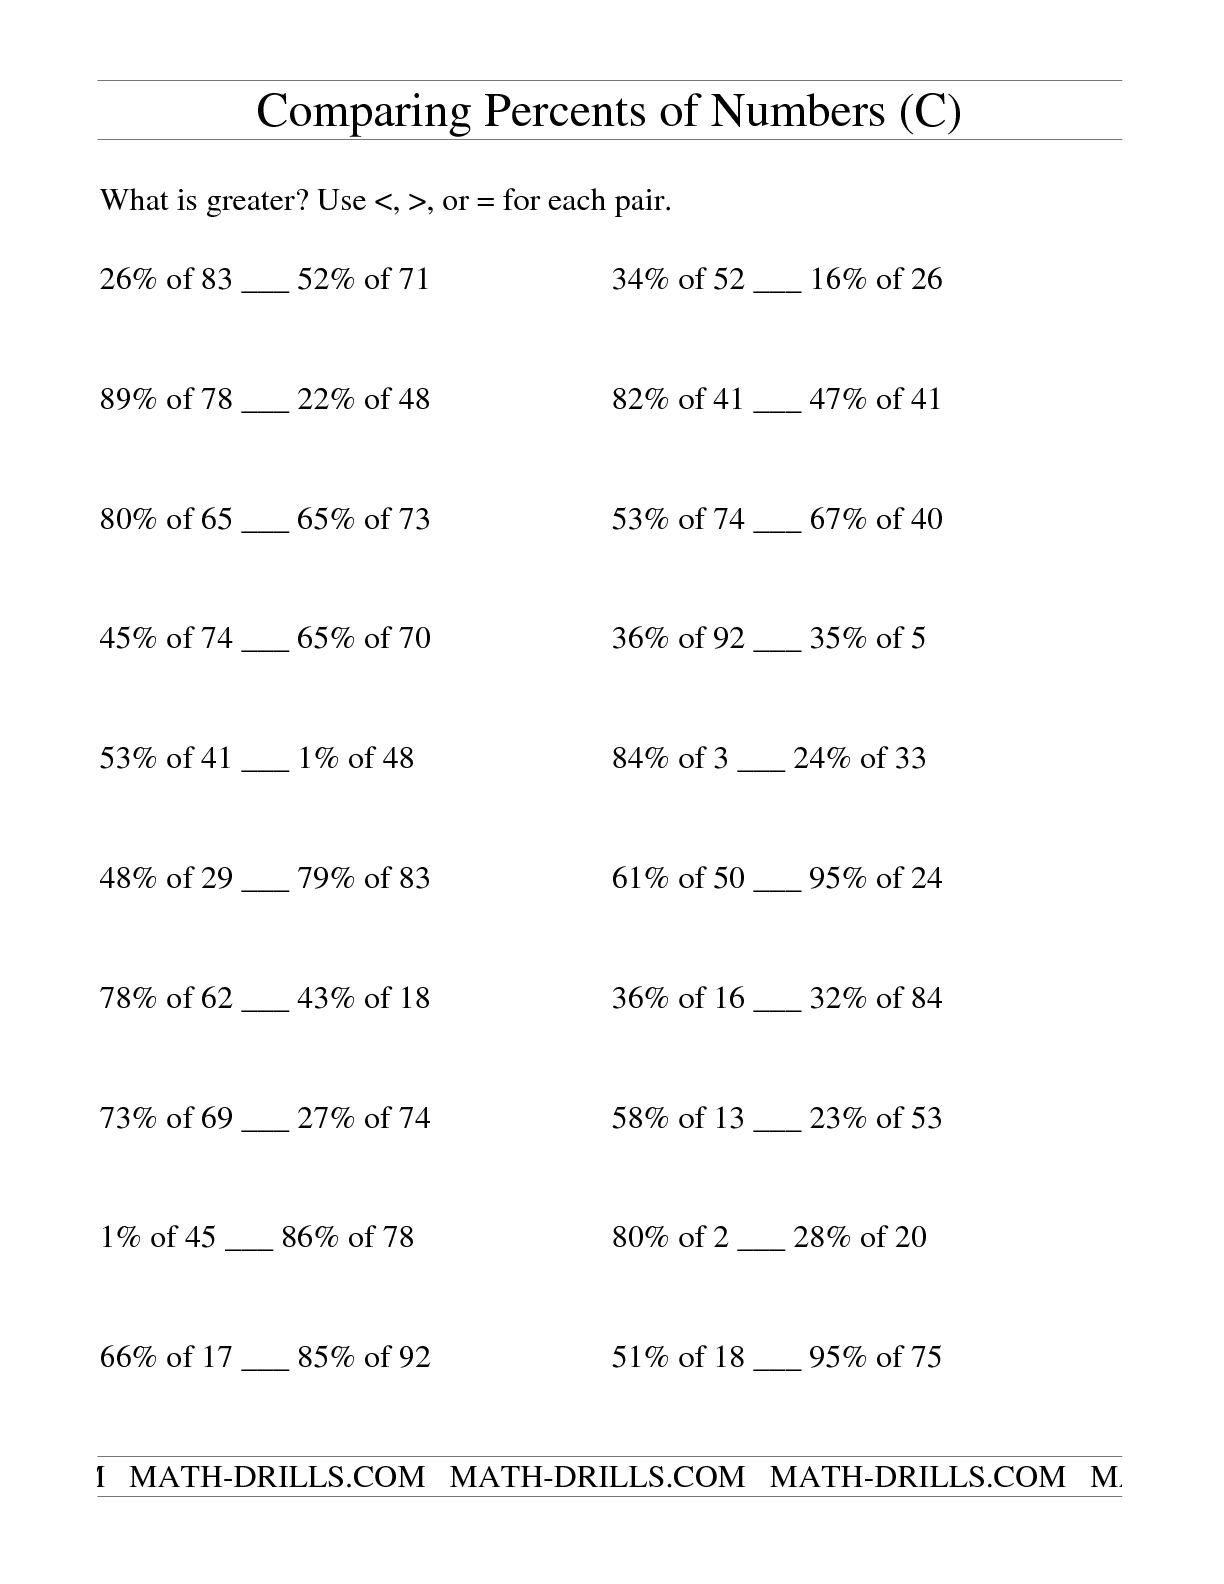 11 Best Images of Comparing Numbers Worksheet - Comparing Numbers to 10 ...